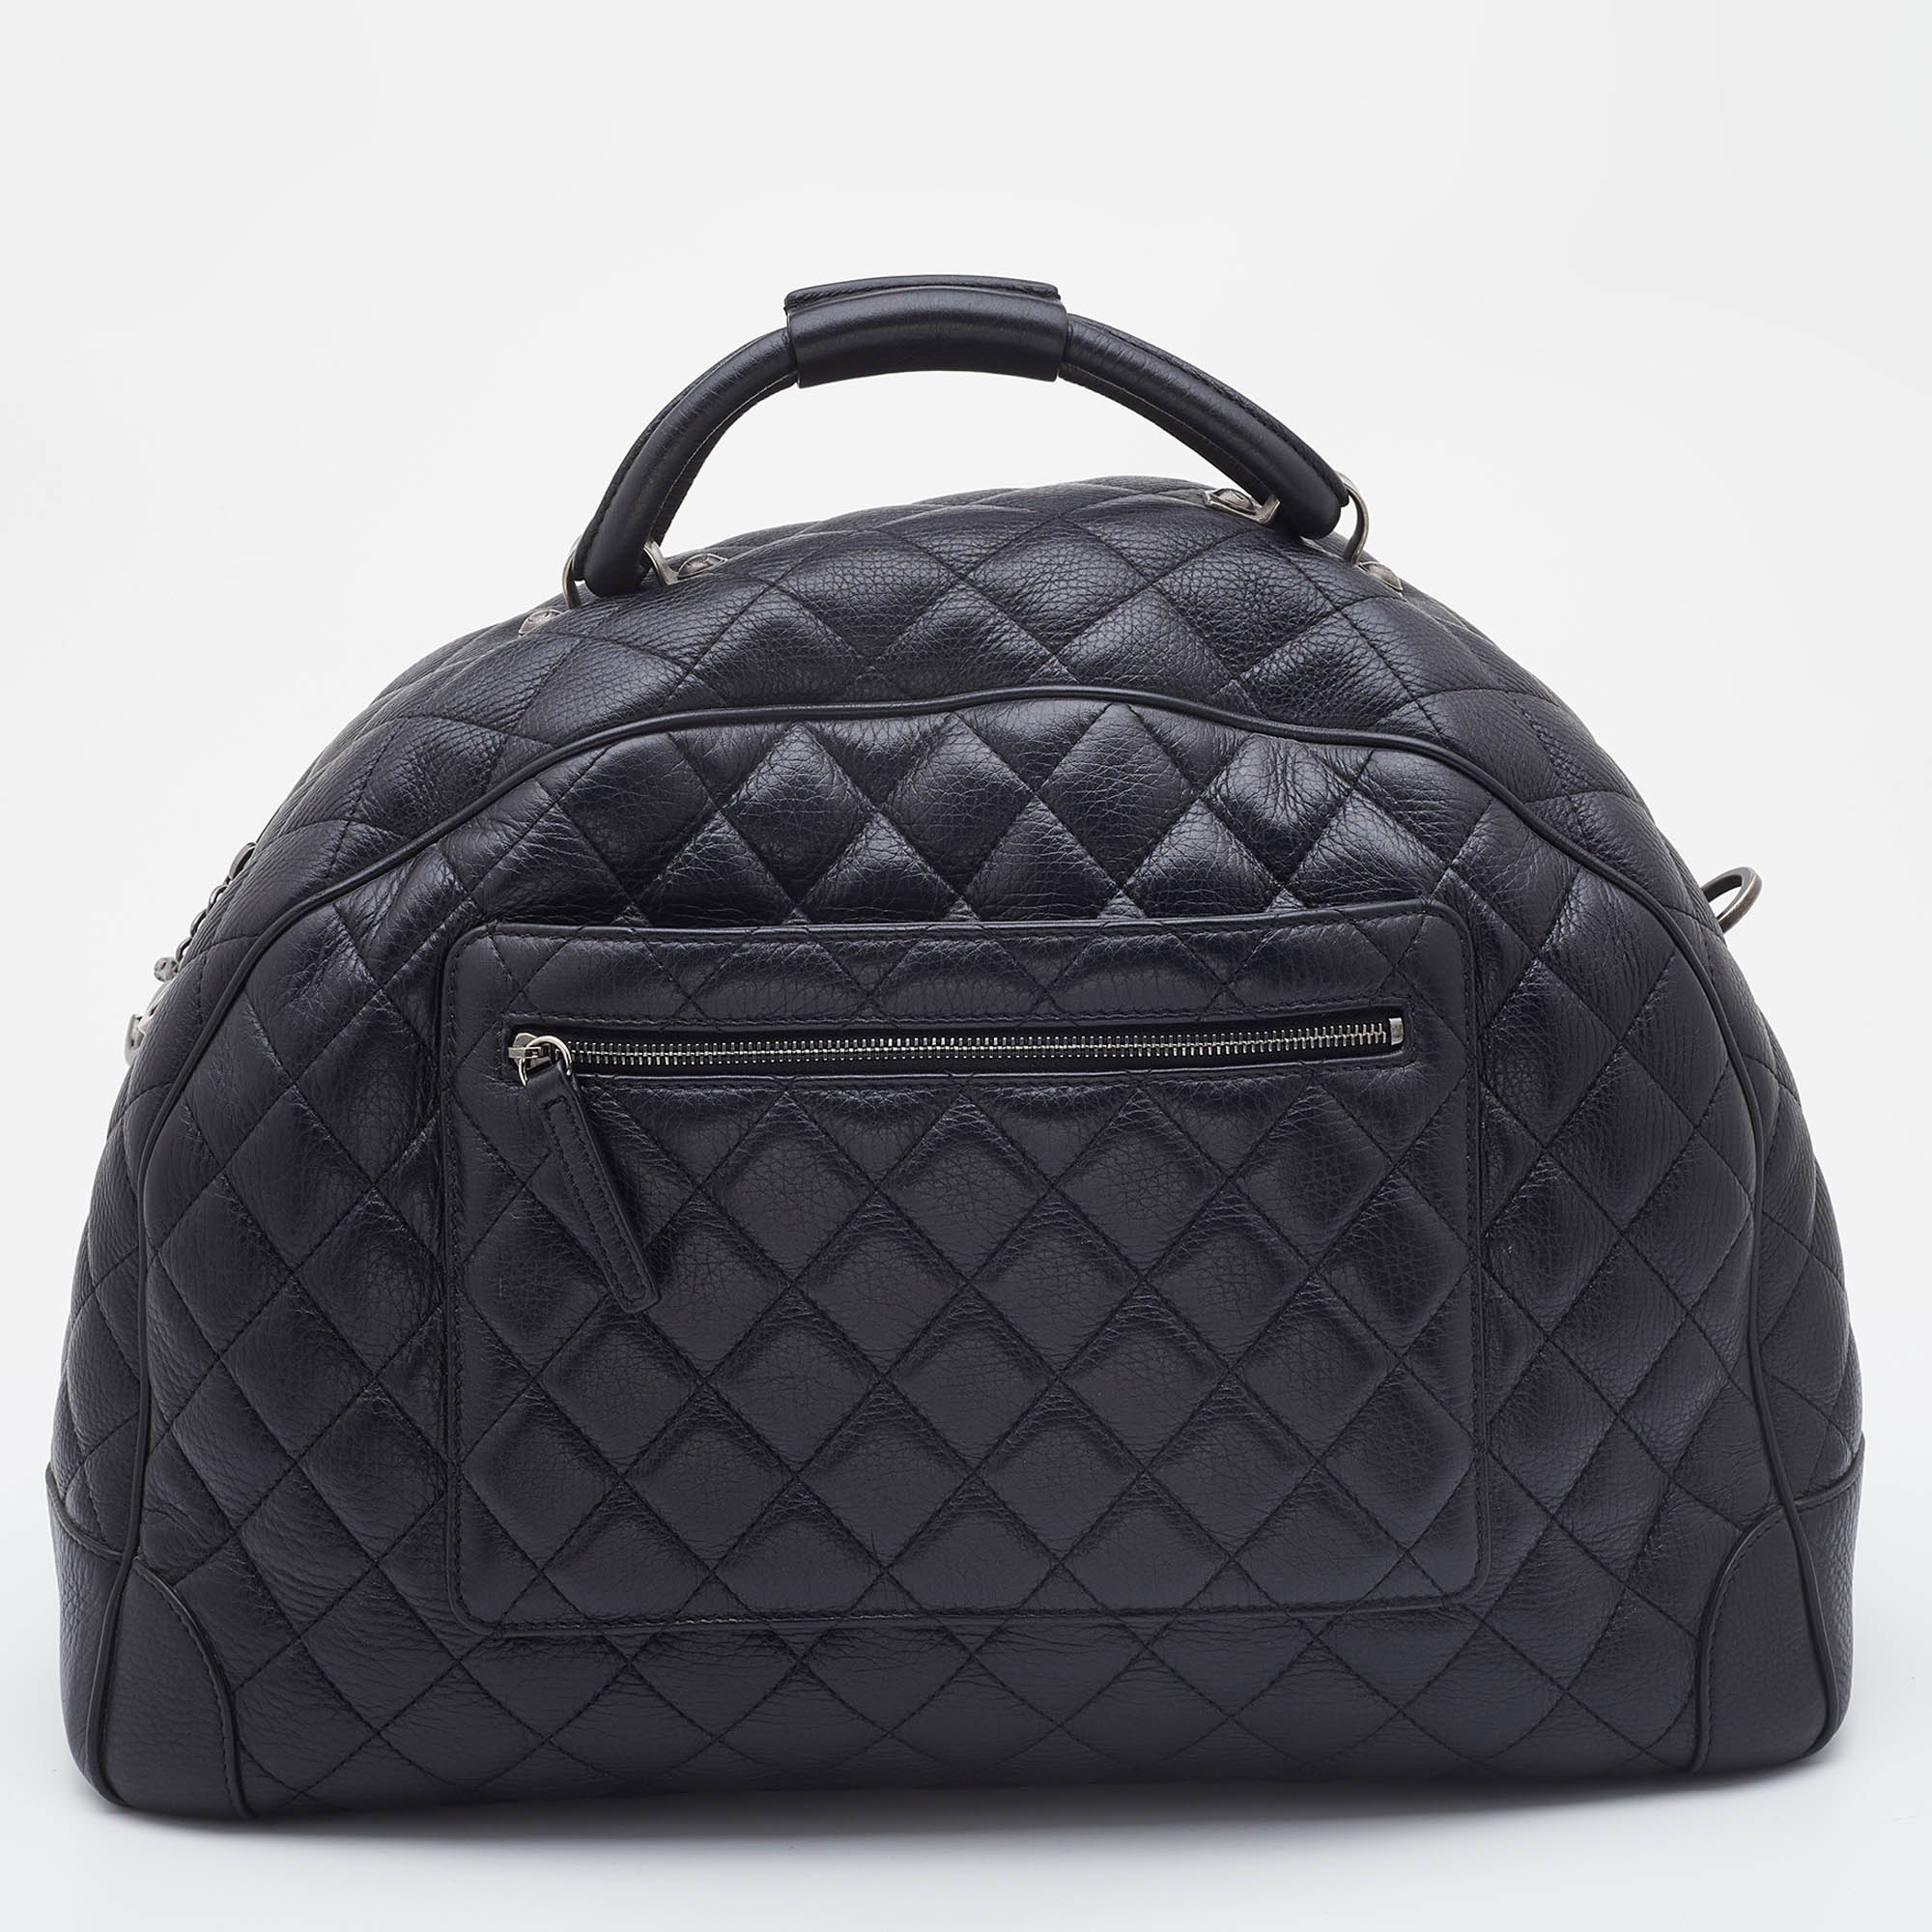 Chanel Black Quilted Leather Large Airlines Round Trip Bag